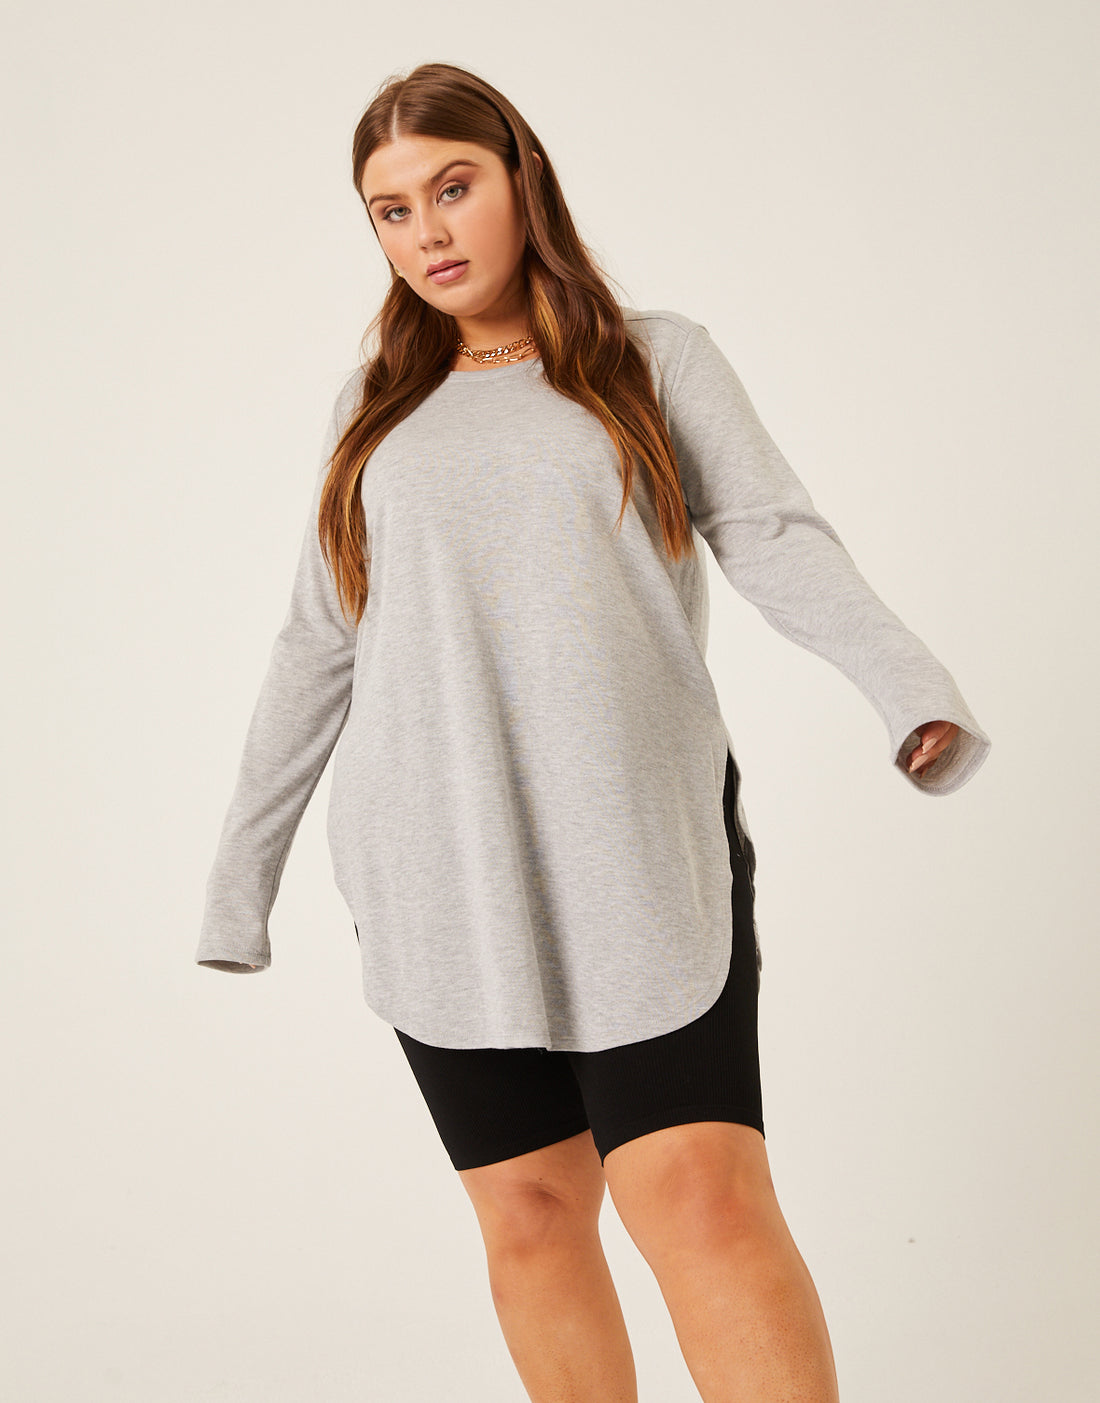 Curve Knit Flowy Long Sleeve Tee Plus Size Tops Gray 1XL -2020AVE